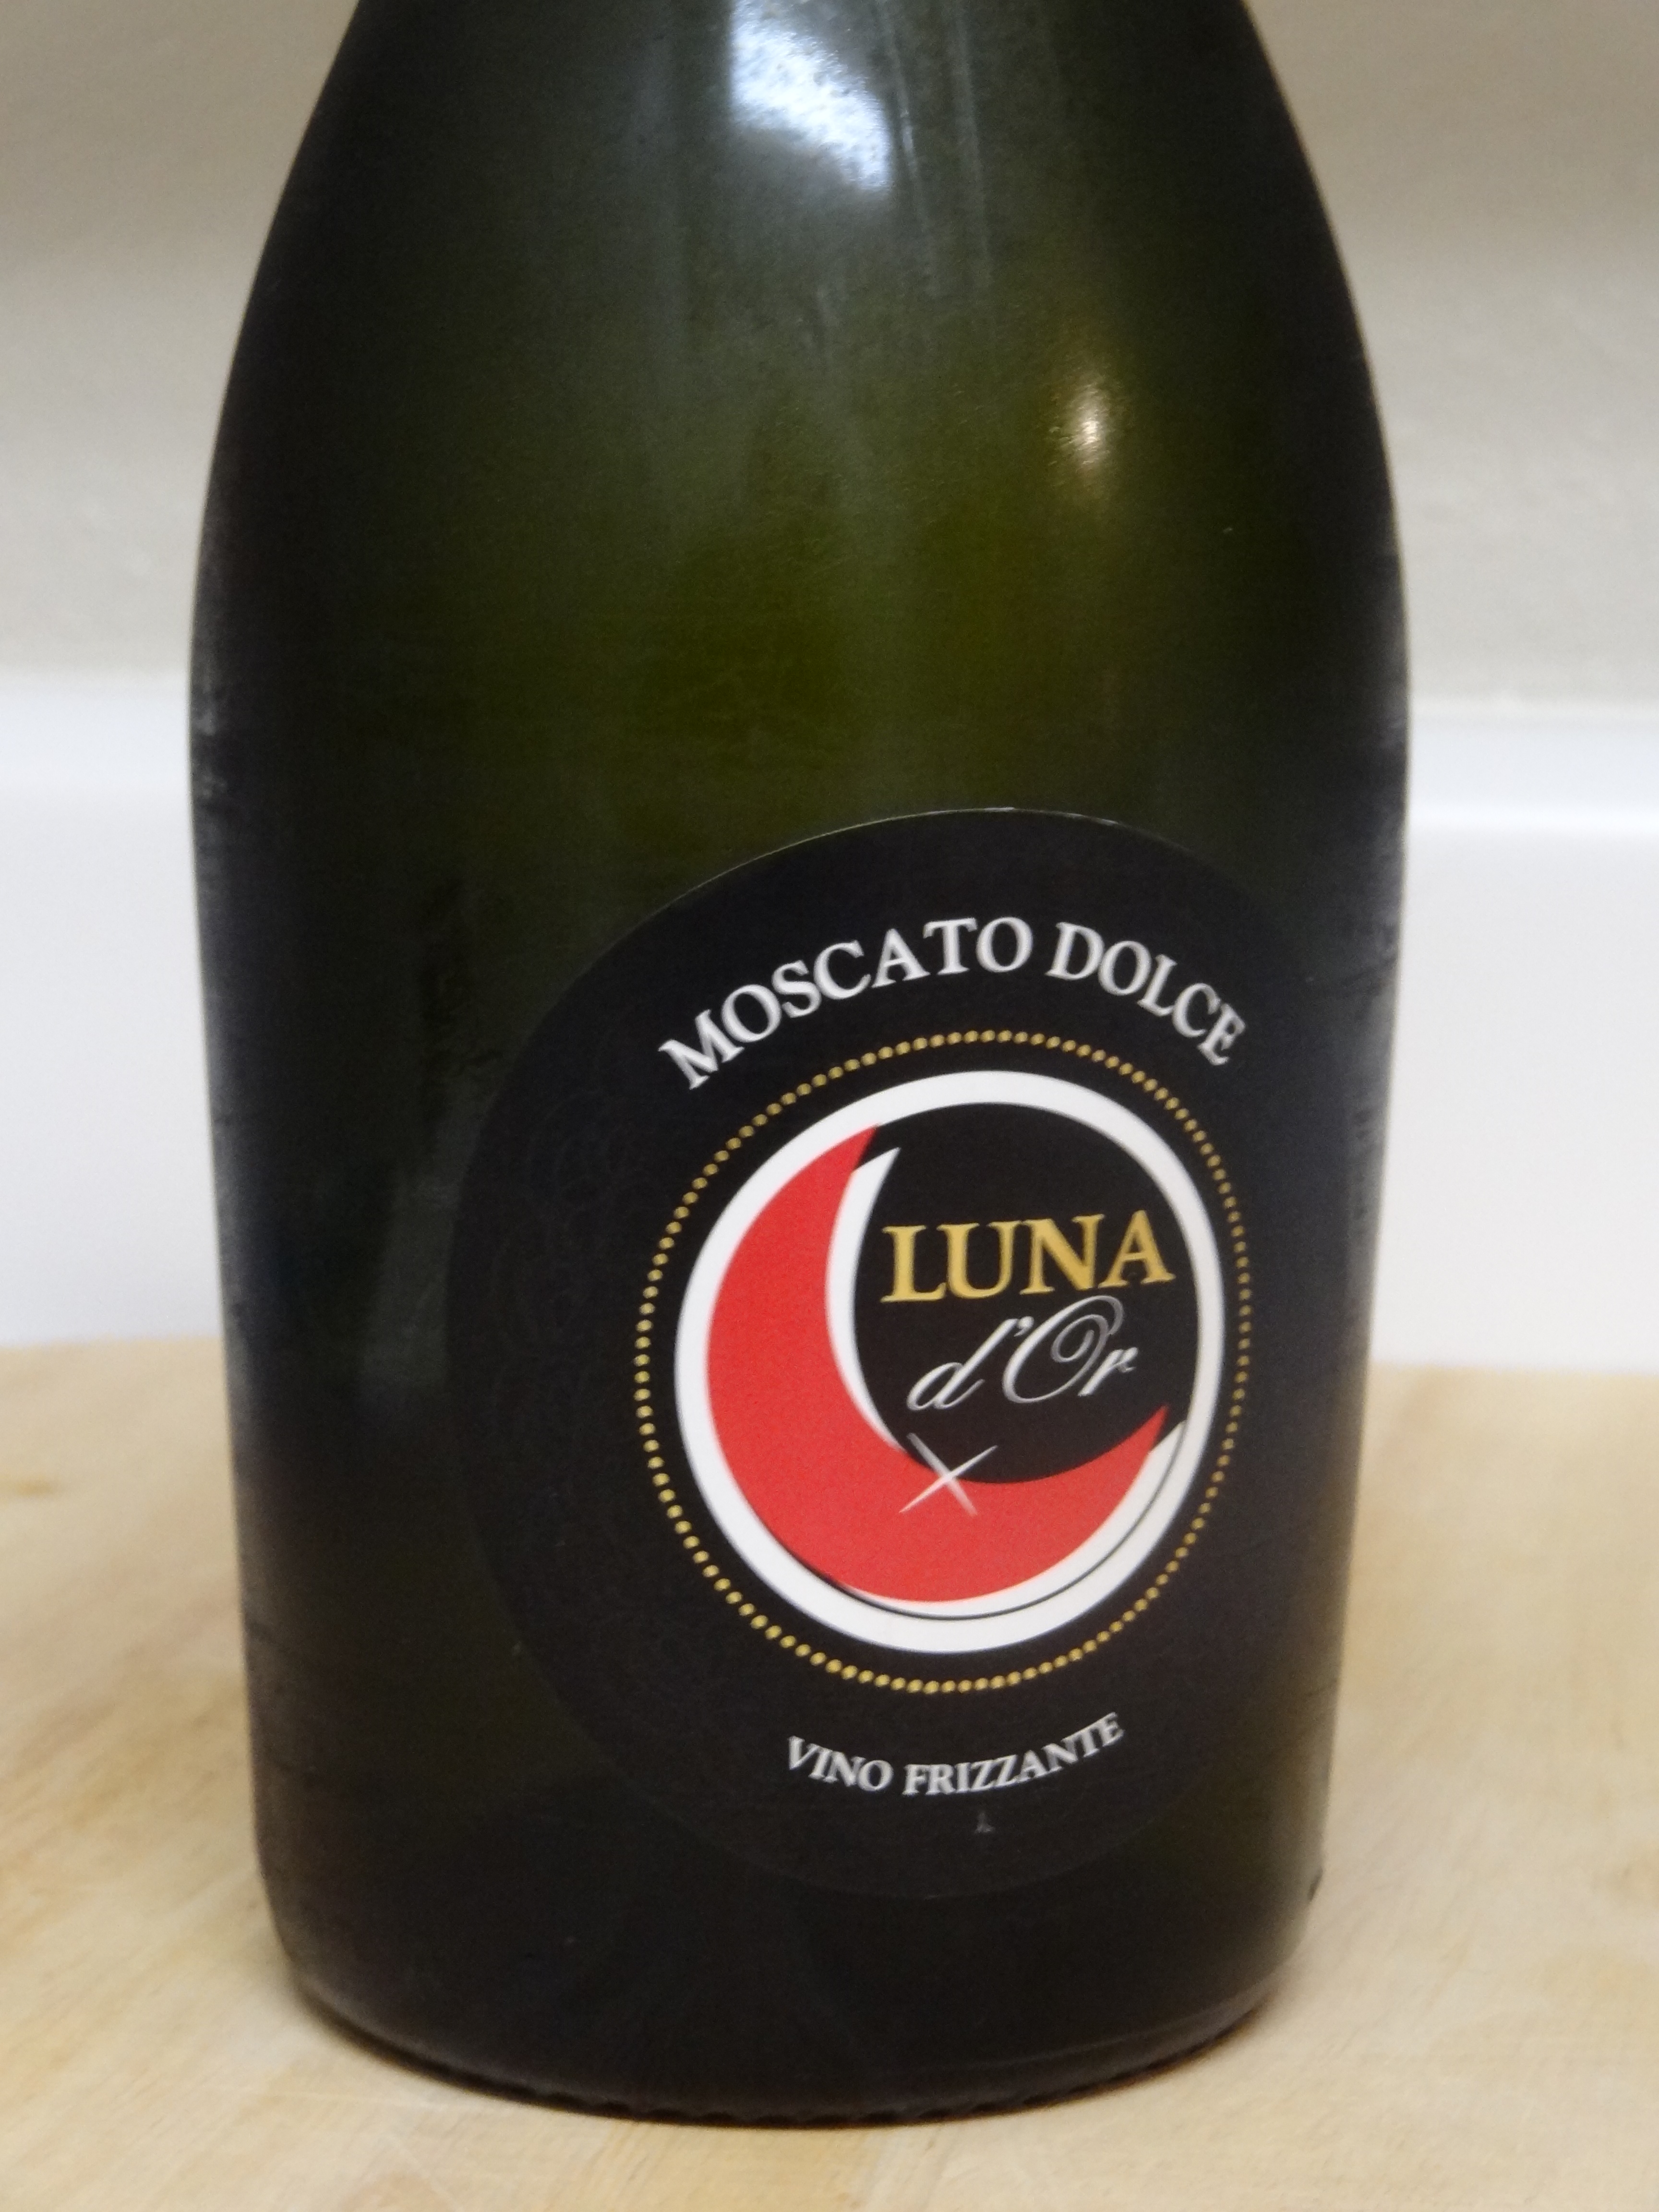 Luna d'Or Moscato Dolce